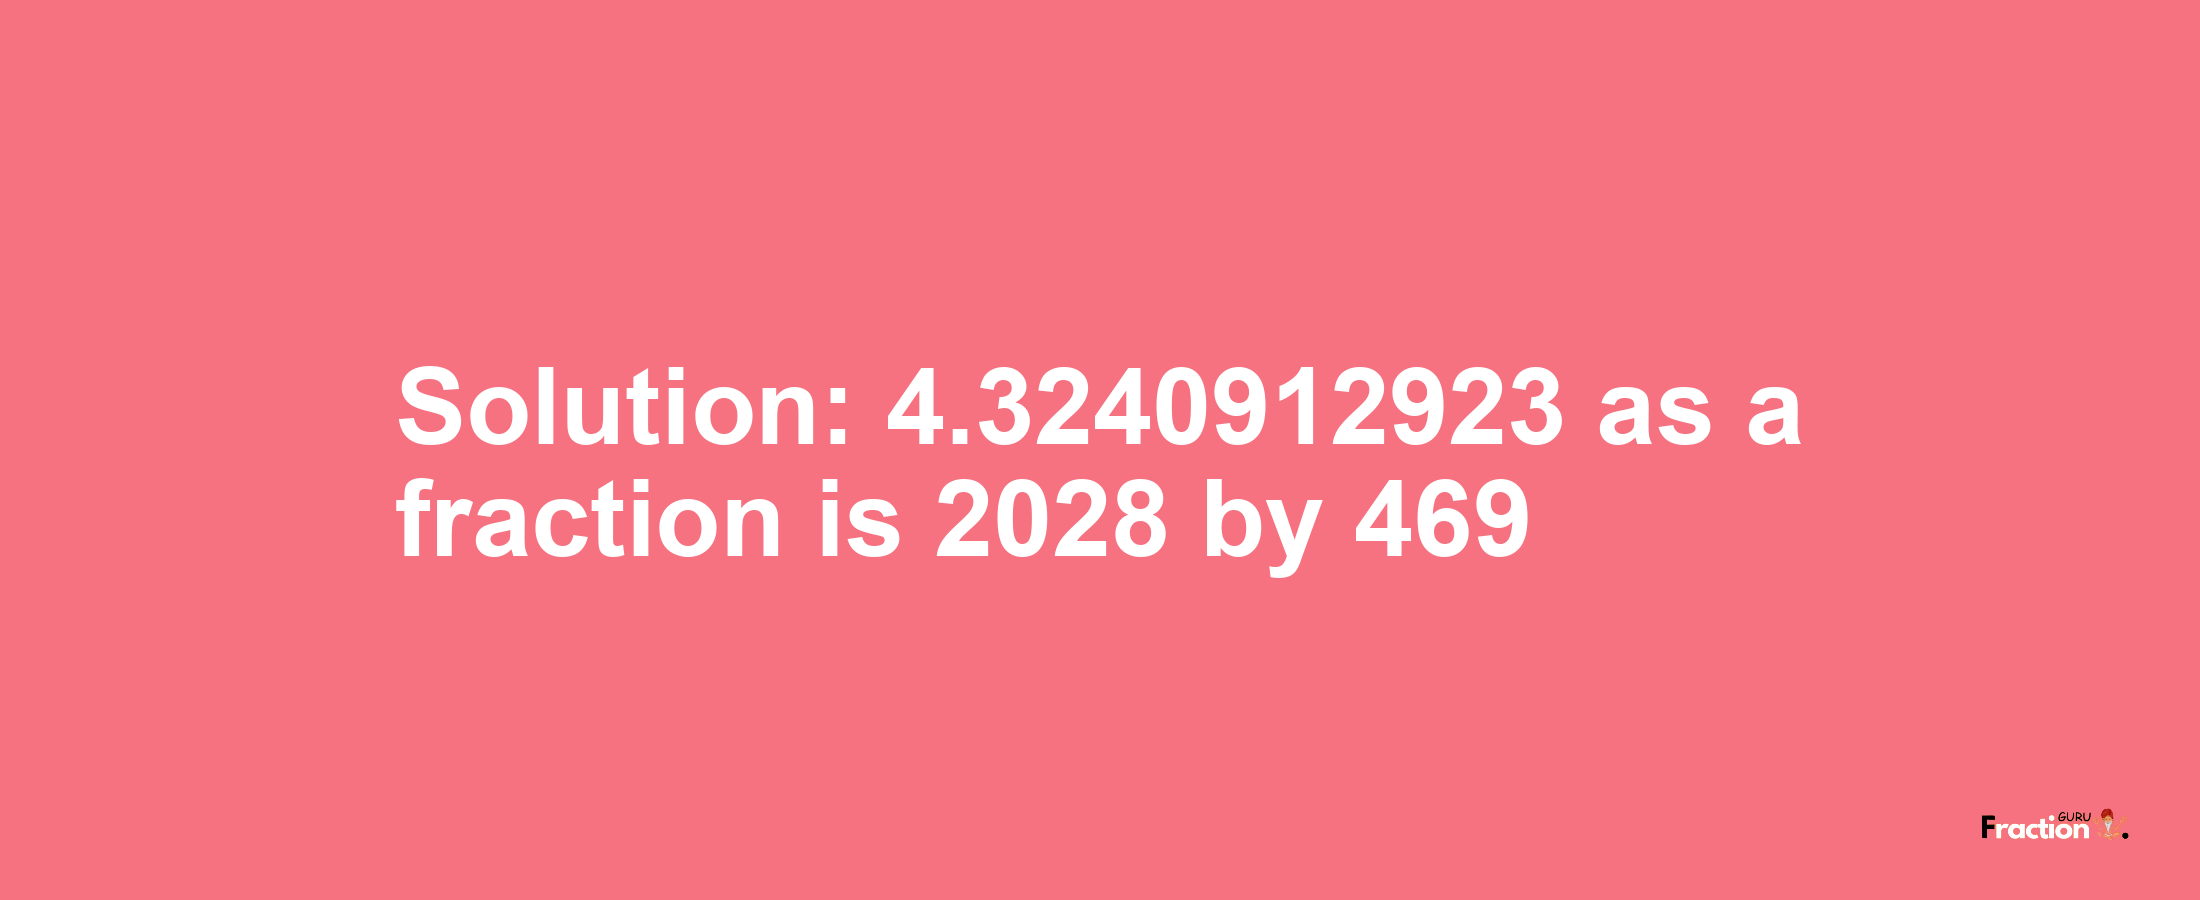 Solution:4.3240912923 as a fraction is 2028/469